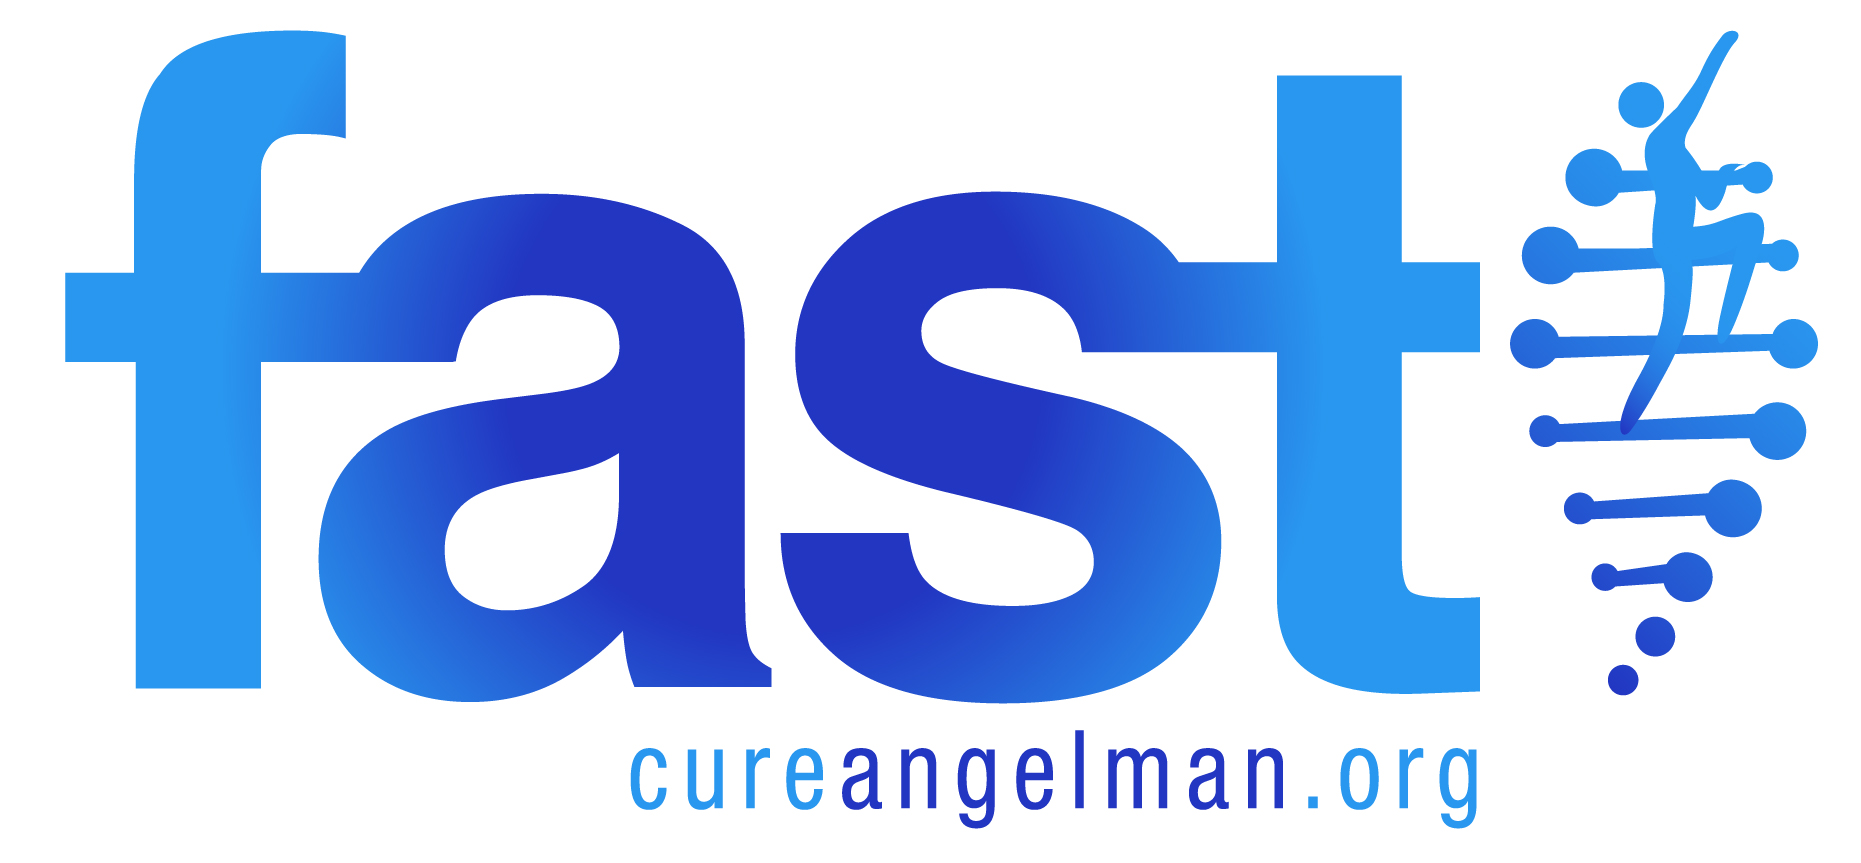 FAST (Foundation for Angelman Syndrome Therapeutics)